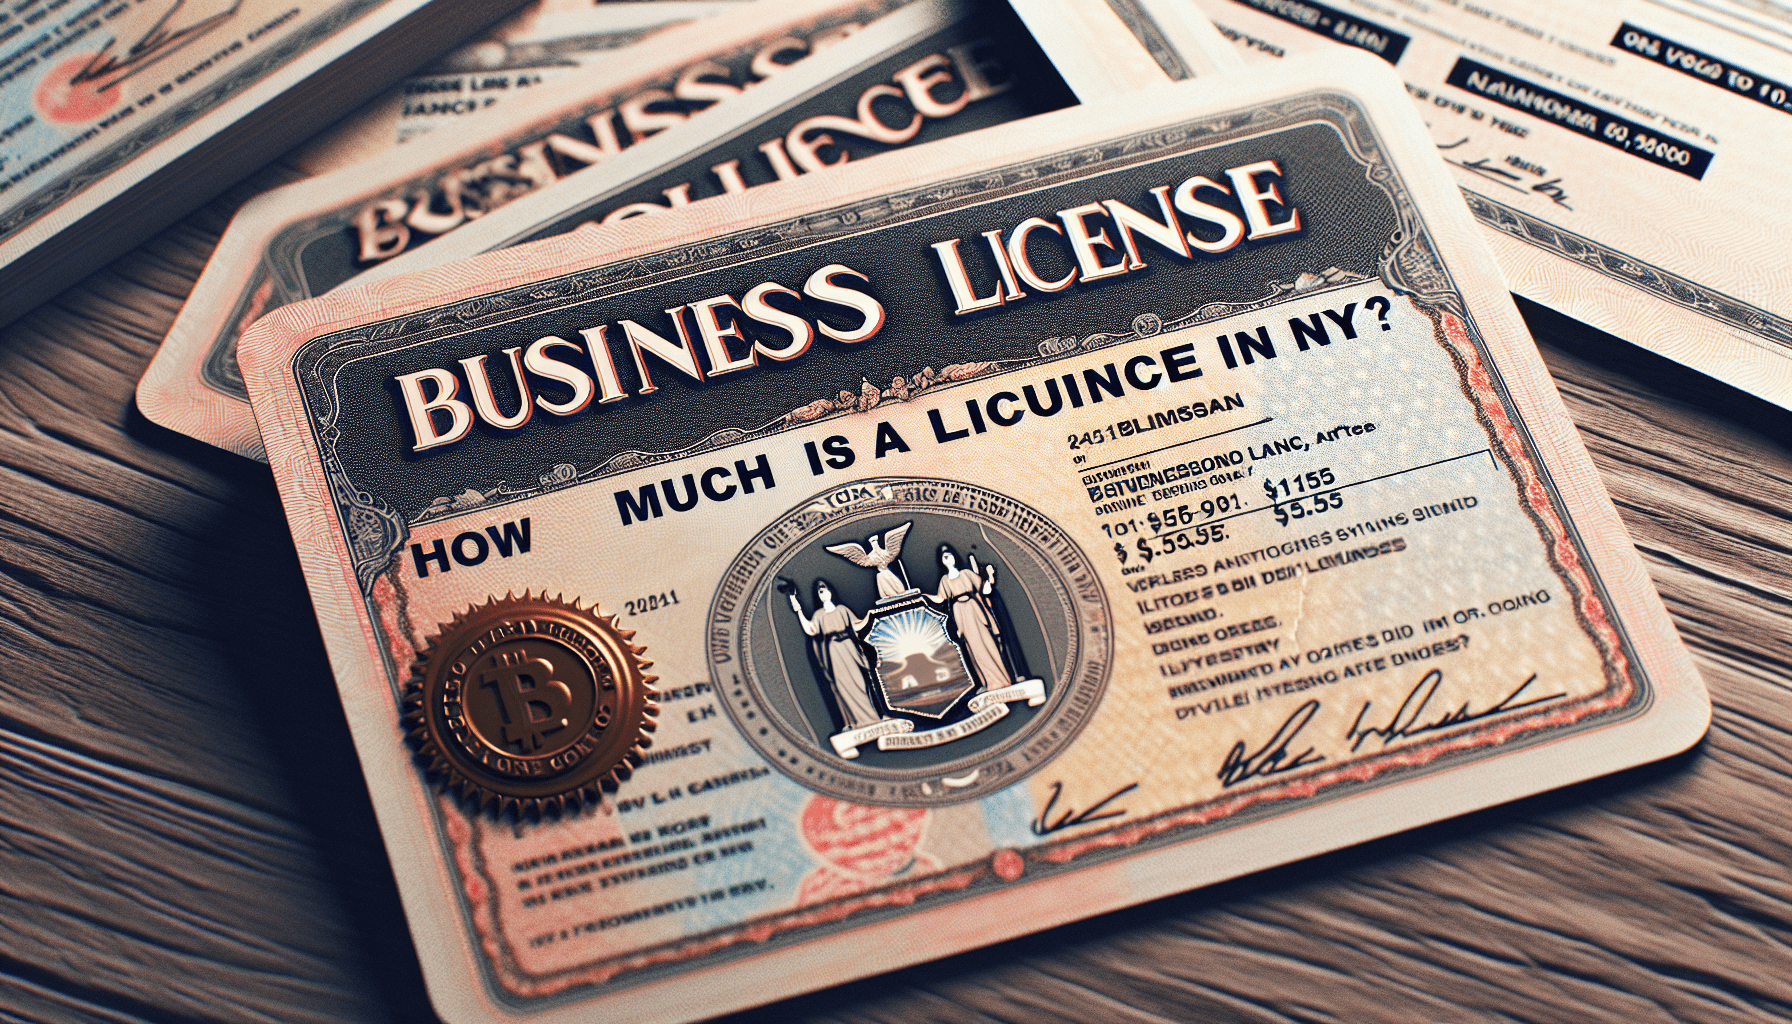 How Much Is A Business Licence In NY?